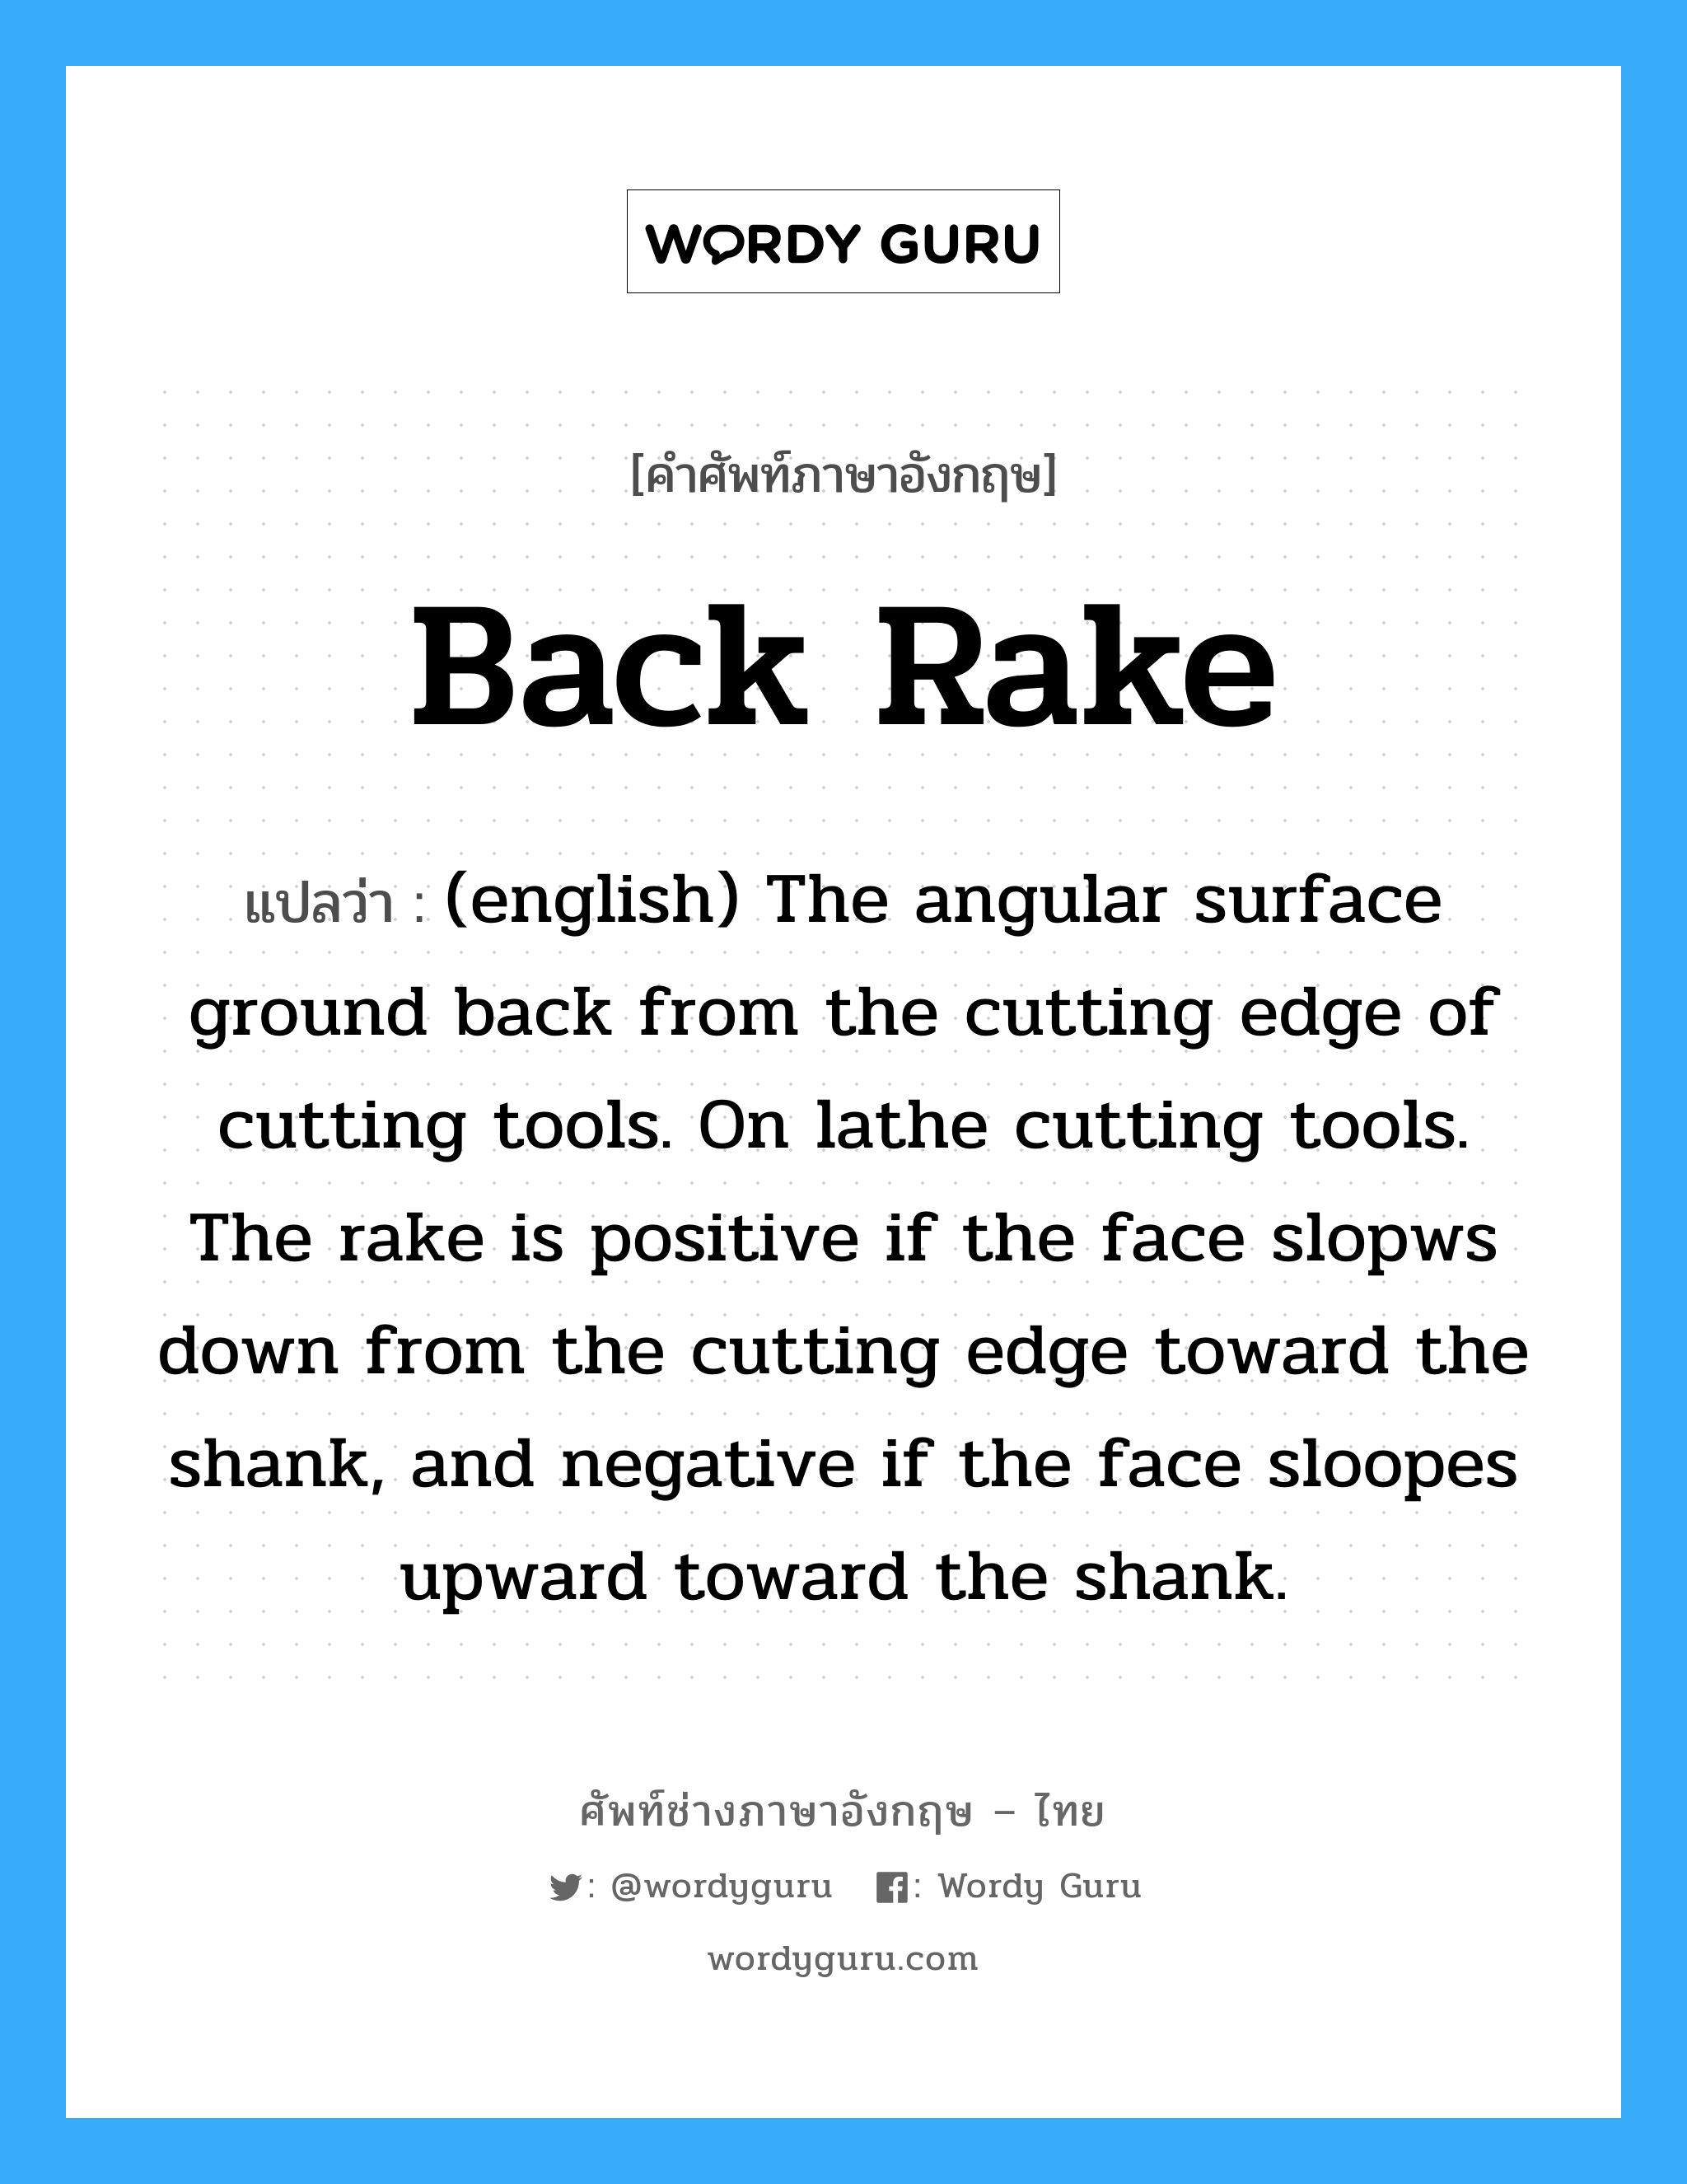 (english) The angular surface ground back from the cutting edge of cutting tools. On lathe cutting tools. The rake is positive if the face slopws down from the cutting edge toward the shank, and negative if the face sloopes upward toward the shank. ภาษาอังกฤษ?, คำศัพท์ช่างภาษาอังกฤษ - ไทย (english) The angular surface ground back from the cutting edge of cutting tools. On lathe cutting tools. The rake is positive if the face slopws down from the cutting edge toward the shank, and negative if the face sloopes upward toward the shank. คำศัพท์ภาษาอังกฤษ (english) The angular surface ground back from the cutting edge of cutting tools. On lathe cutting tools. The rake is positive if the face slopws down from the cutting edge toward the shank, and negative if the face sloopes upward toward the shank. แปลว่า Back Rake